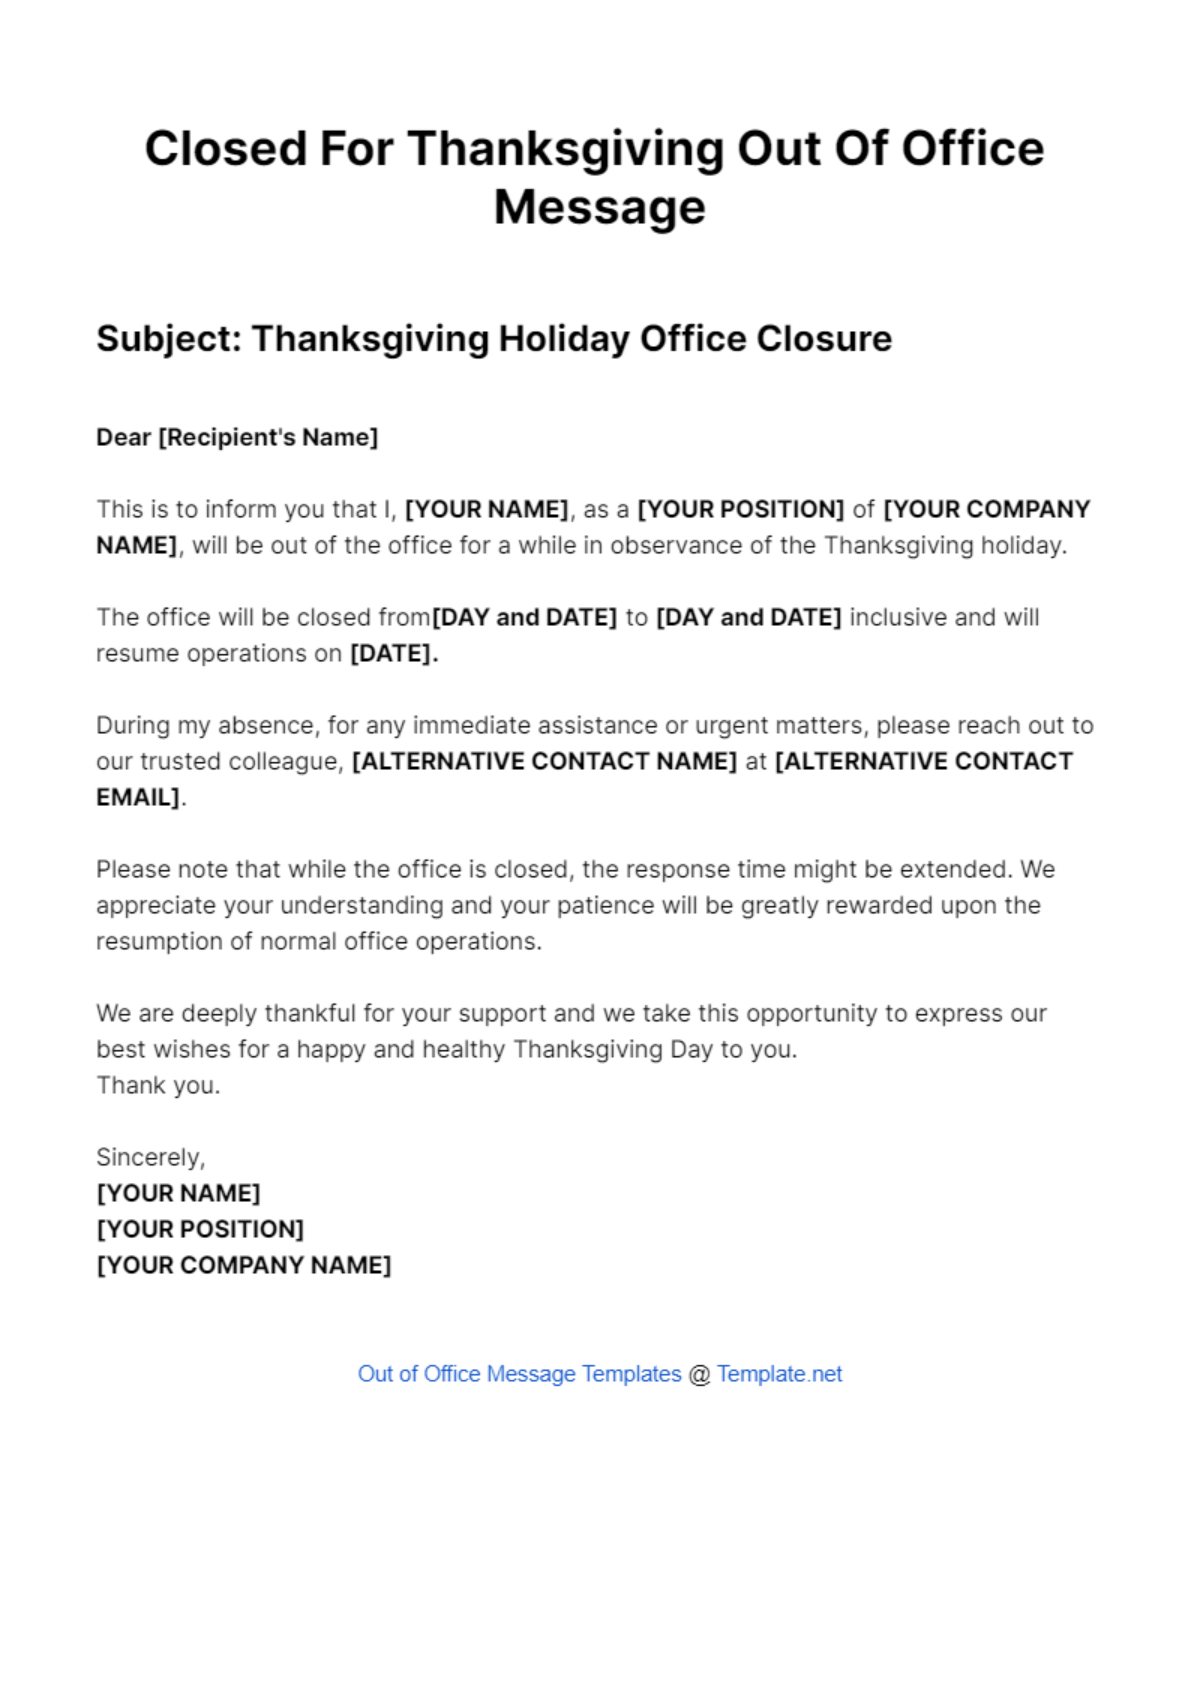 Closed For Thanksgiving Out Of Office Message Template